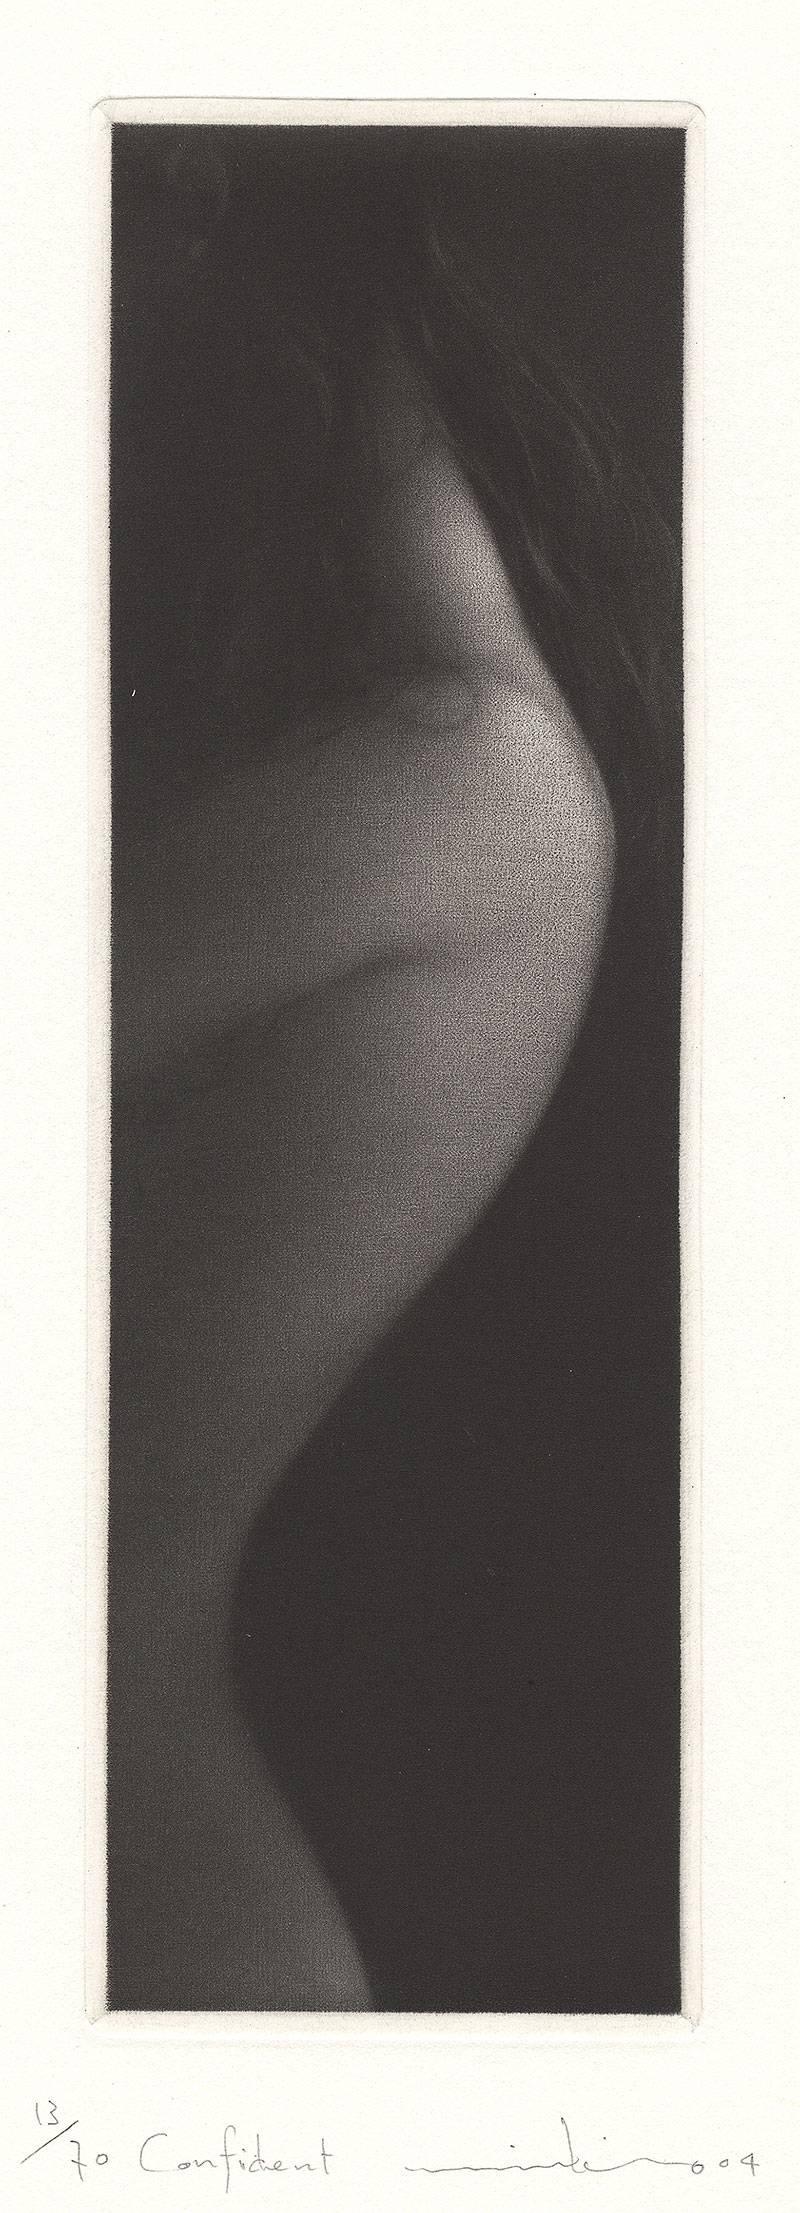 Mikio Watanabe Figurative Print - Confident (profile of nude young woman with wisps of hair on her neck)